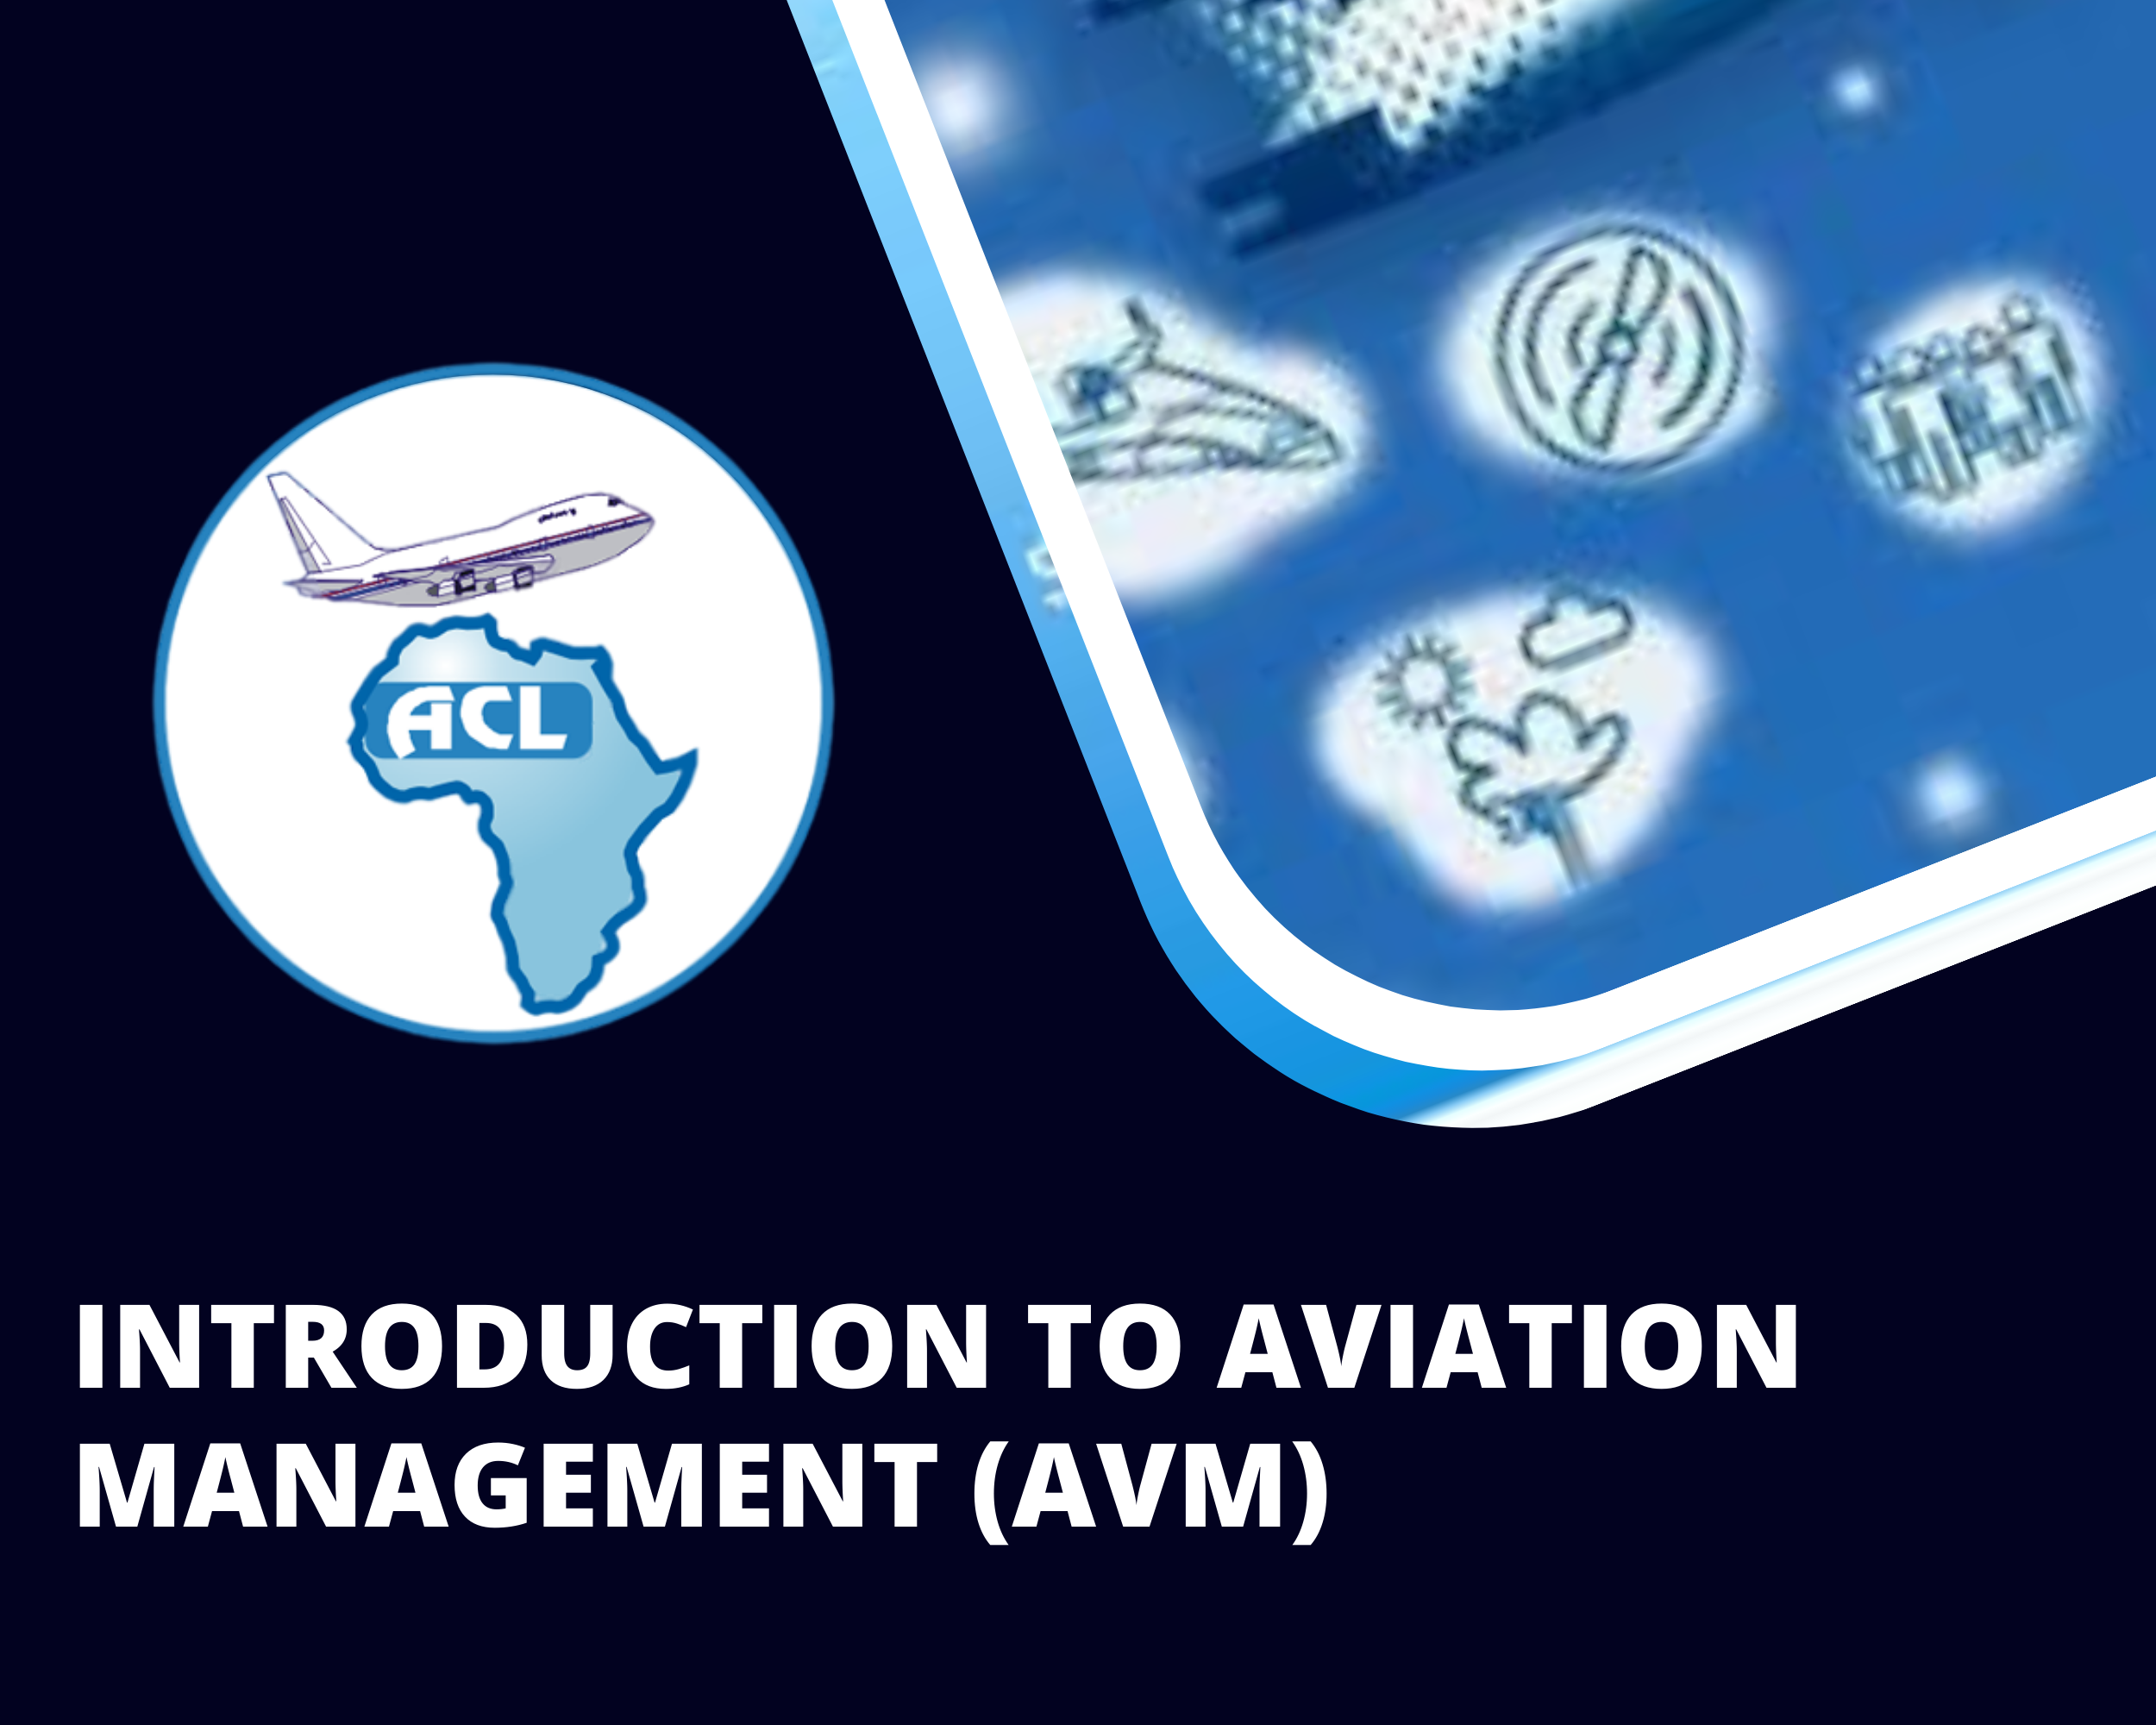 INTRODUCTION TO AVIATION MANAGEMENT (AVM)